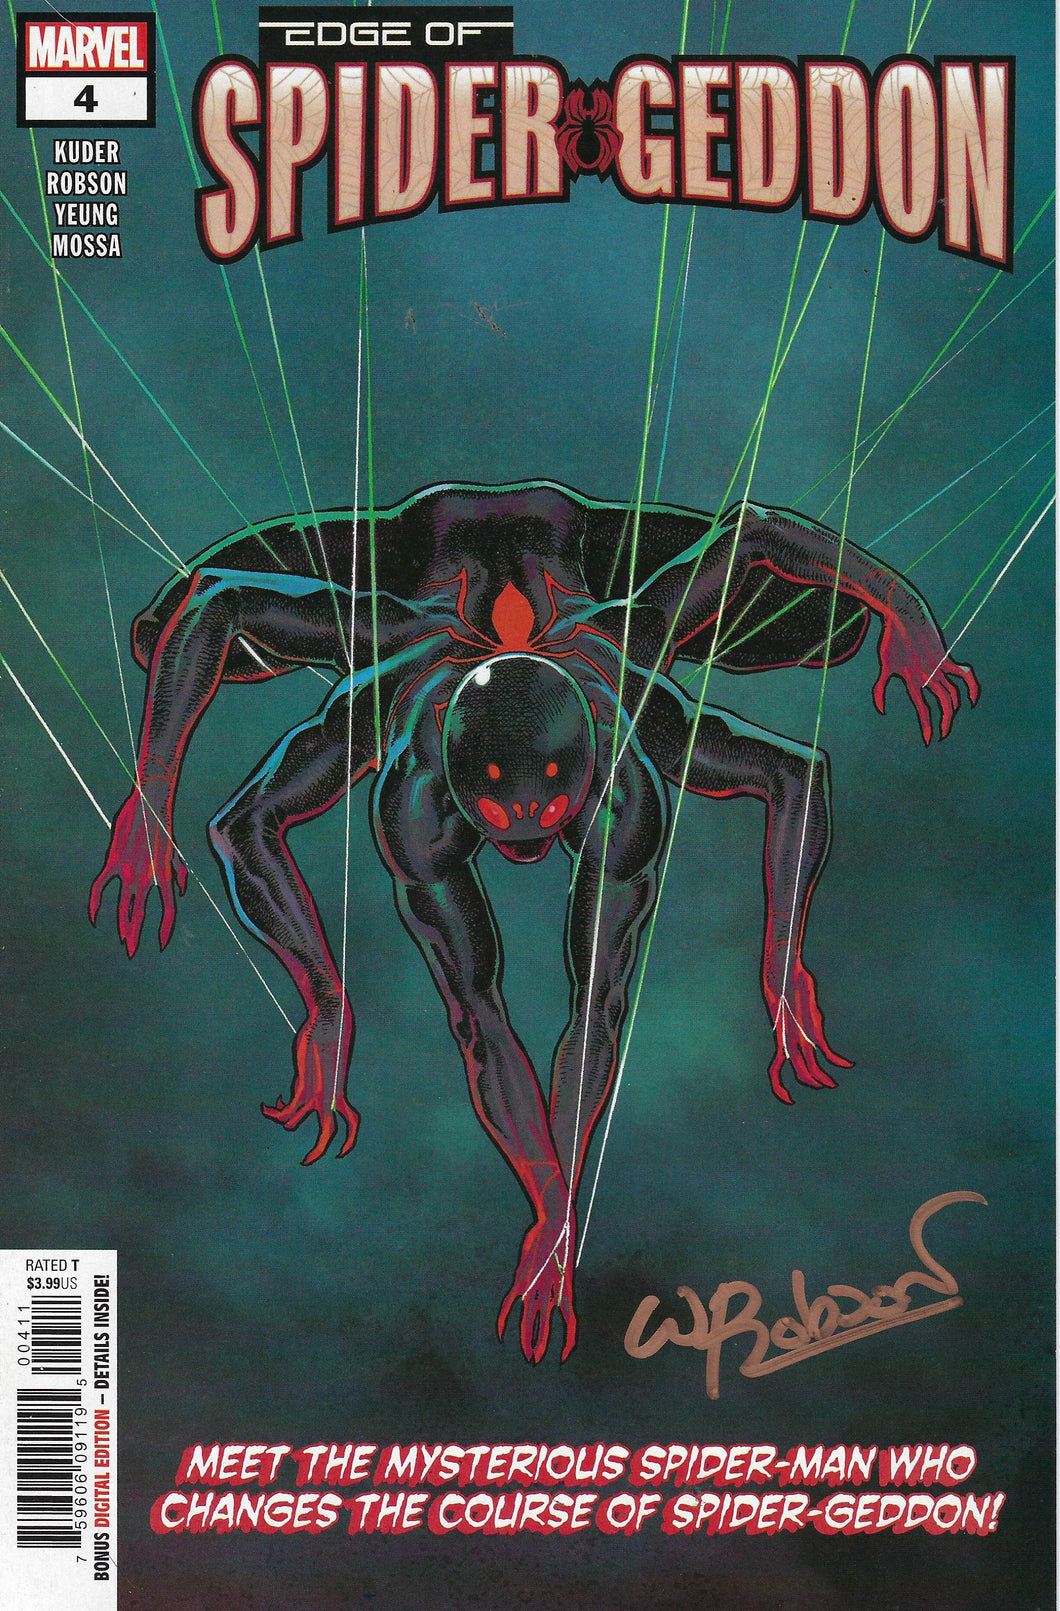 Edge of Spider-Geddon #4 signed by Will Robson